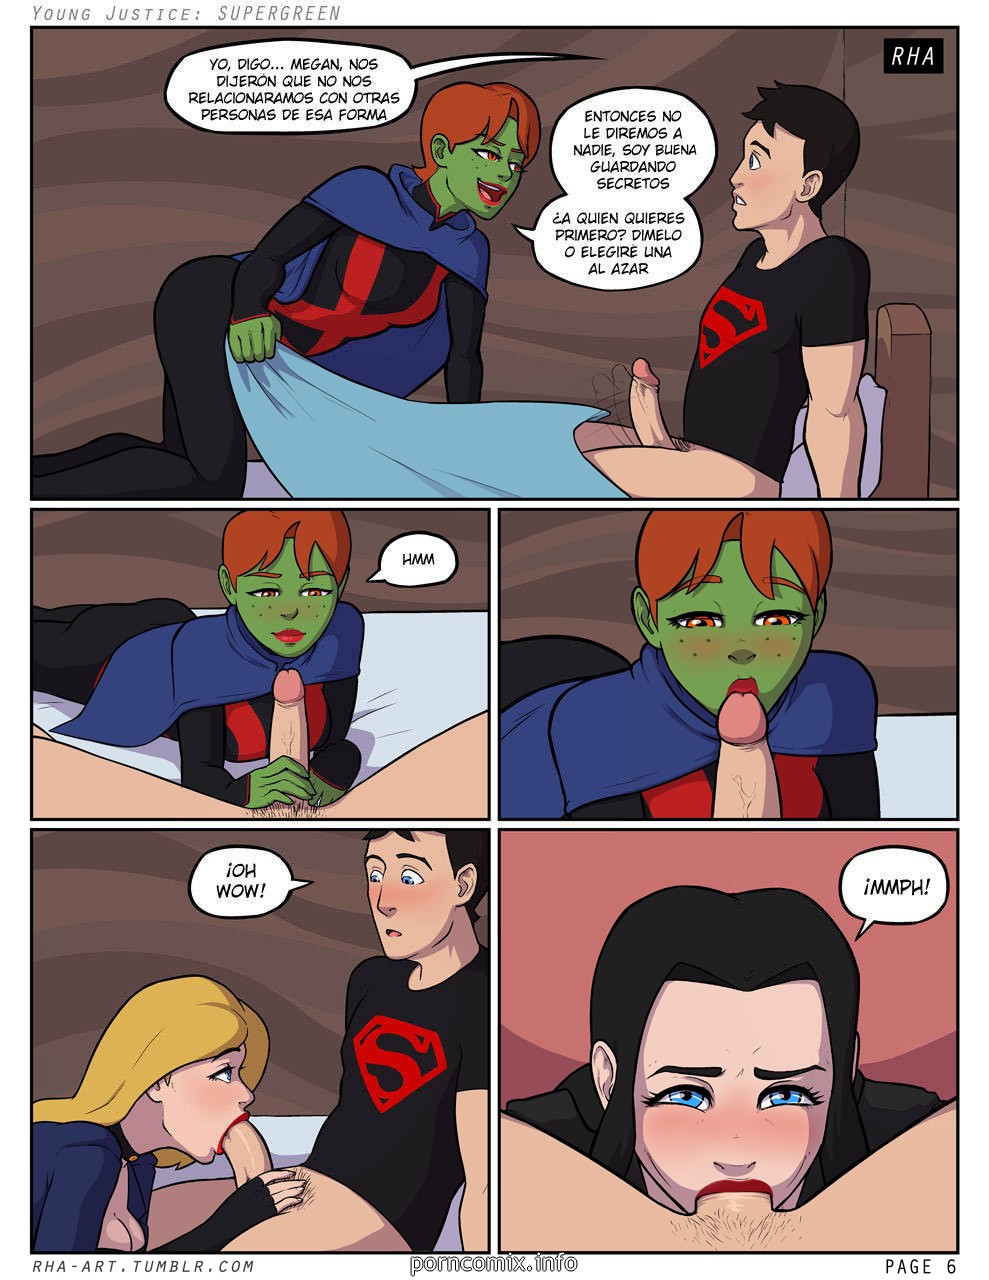 YoungJustice07.jpg